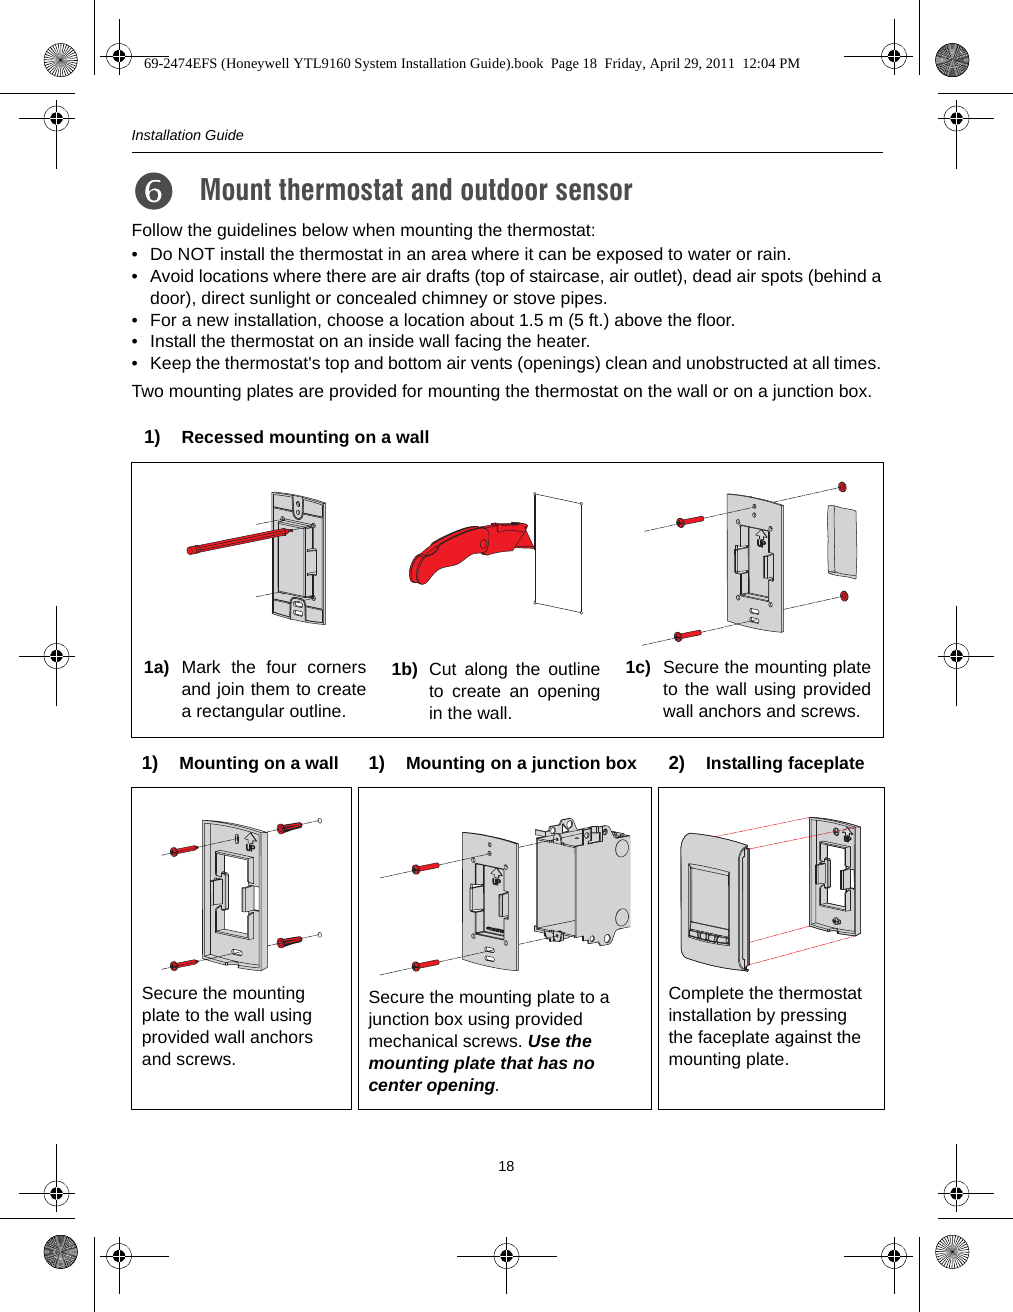 Installation Guide18Follow the guidelines below when mounting the thermostat:• Do NOT install the thermostat in an area where it can be exposed to water or rain.• Avoid locations where there are air drafts (top of staircase, air outlet), dead air spots (behind adoor), direct sunlight or concealed chimney or stove pipes.• For a new installation, choose a location about 1.5 m (5 ft.) above the floor.• Install the thermostat on an inside wall facing the heater.• Keep the thermostat&apos;s top and bottom air vents (openings) clean and unobstructed at all times.Two mounting plates are provided for mounting the thermostat on the wall or on a junction box.Mount thermostat and outdoor sensor 7.1) Recessed mounting on a wall1a) Mark the four cornersand join them to createa rectangular outline.1b) Cut along the outlineto create an openingin the wall.1c) Secure the mounting plateto the wall using providedwall anchors and screws.1) Mounting on a wall 1) Mounting on a junction box 2) Installing faceplateSecure the mounting plate to the wall using provided wall anchors and screws.Secure the mounting plate to a junction box using provided mechanical screws. Use the mounting plate that has no center opening.Complete the thermostat installation by pressing the faceplate against the mounting plate.69-2474EFS (Honeywell YTL9160 System Installation Guide).book  Page 18  Friday, April 29, 2011  12:04 PM